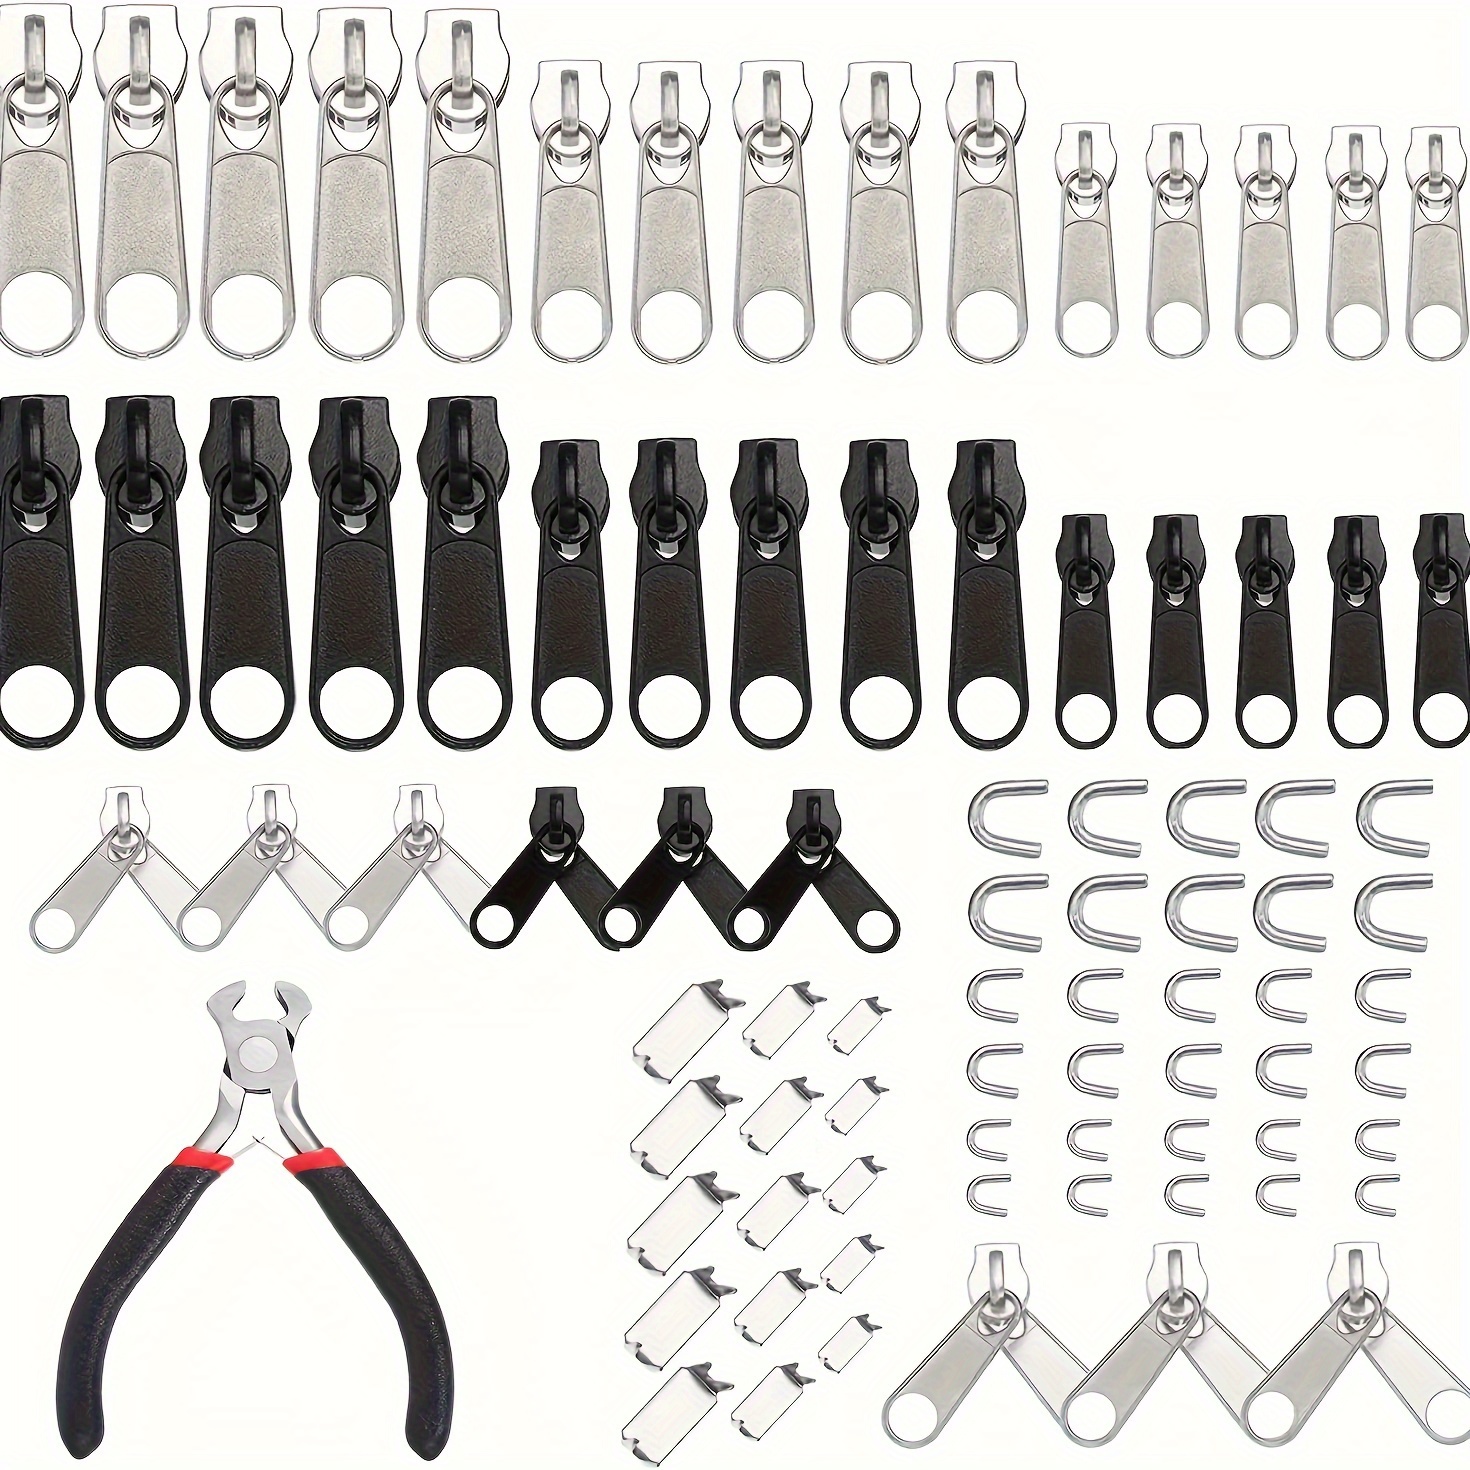 

85pcs Zipper Repair Kit Zipper Replacement Zipper With Instruction Manual And Zipper Install Pliers Tool For Sewing Luggage Jackets Coat Jeans